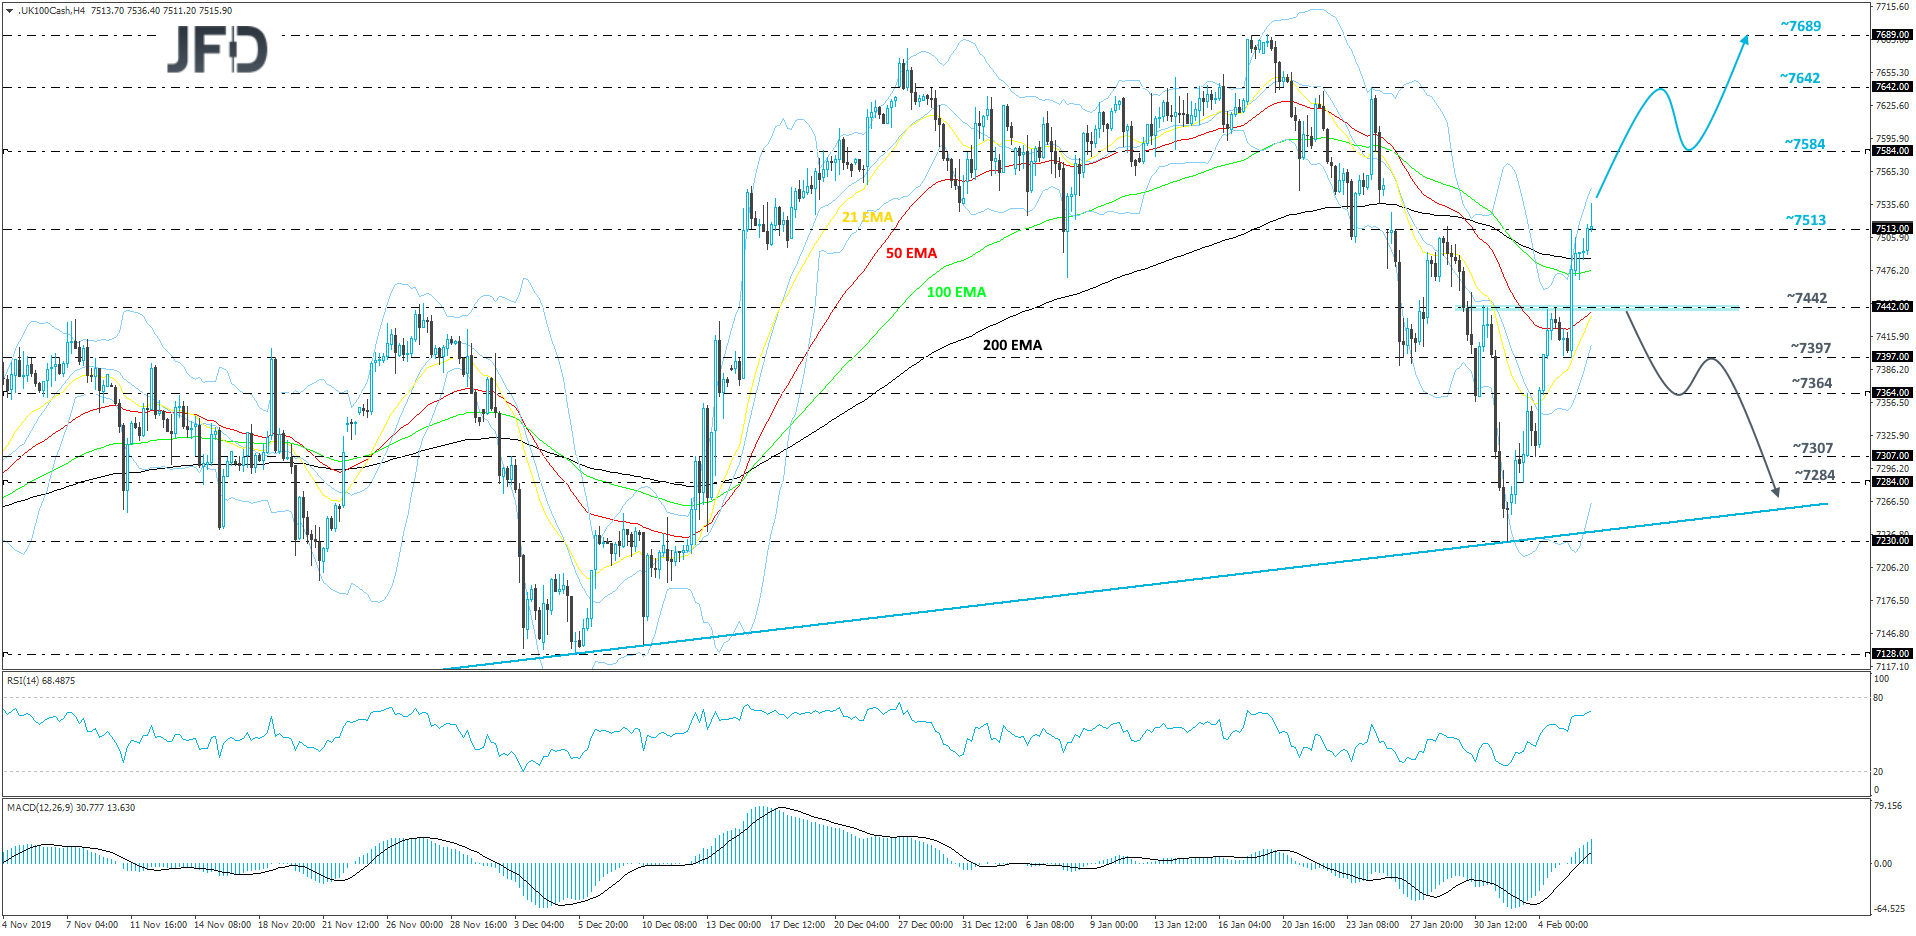 FTSE 100 cash index 4-hour chart technical analysis